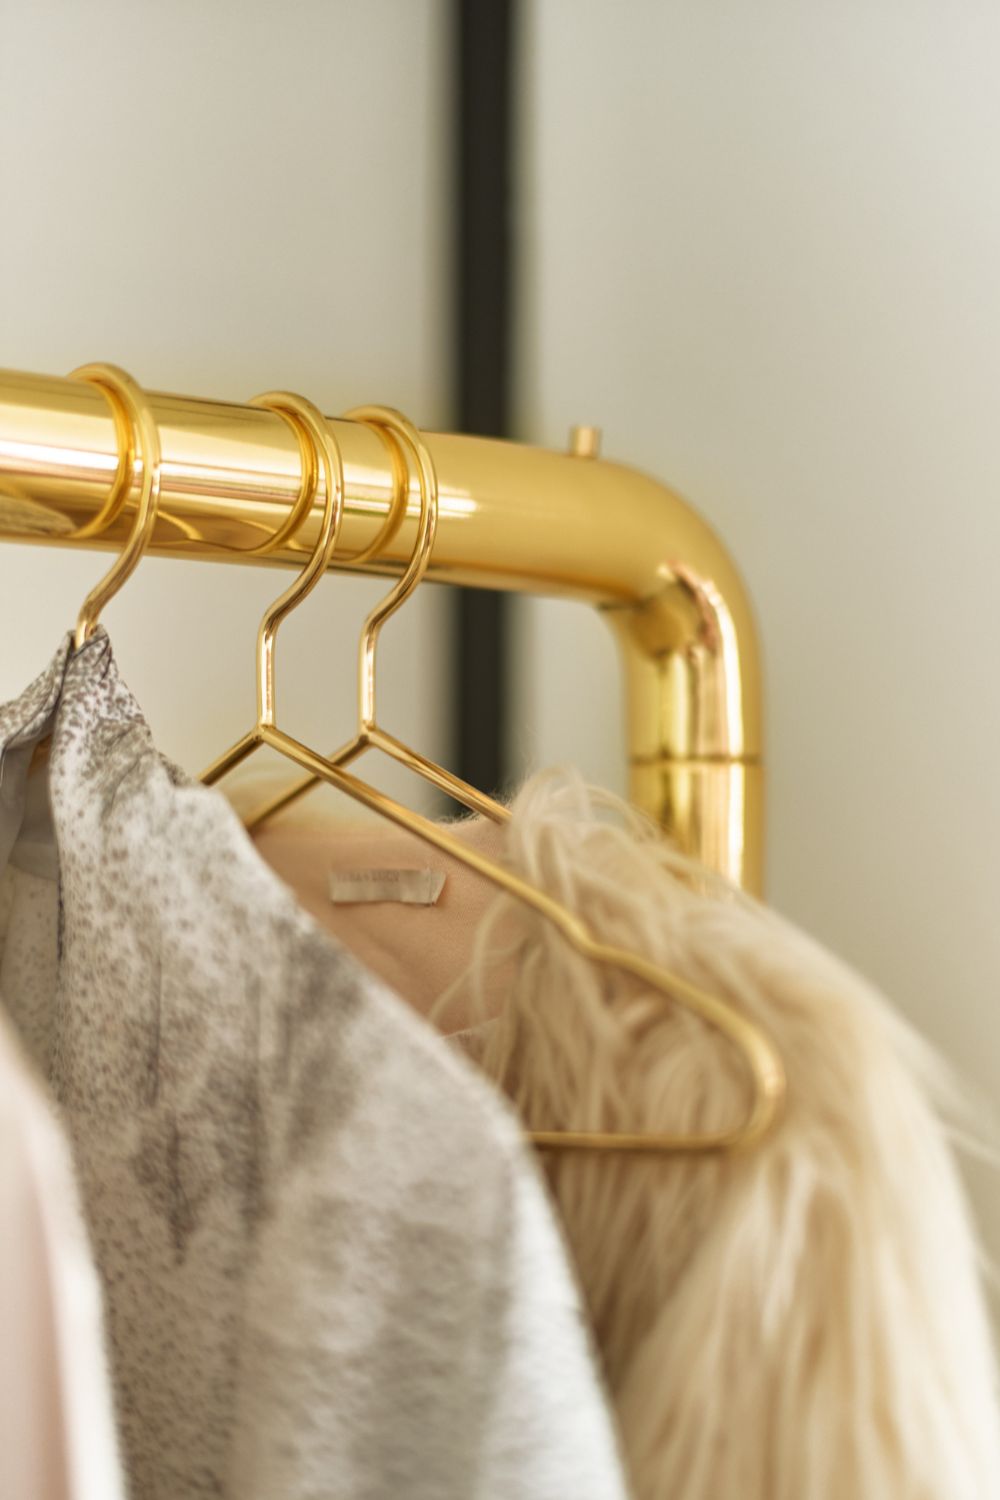 Chubby Clothing Rack With Hangers, Brass